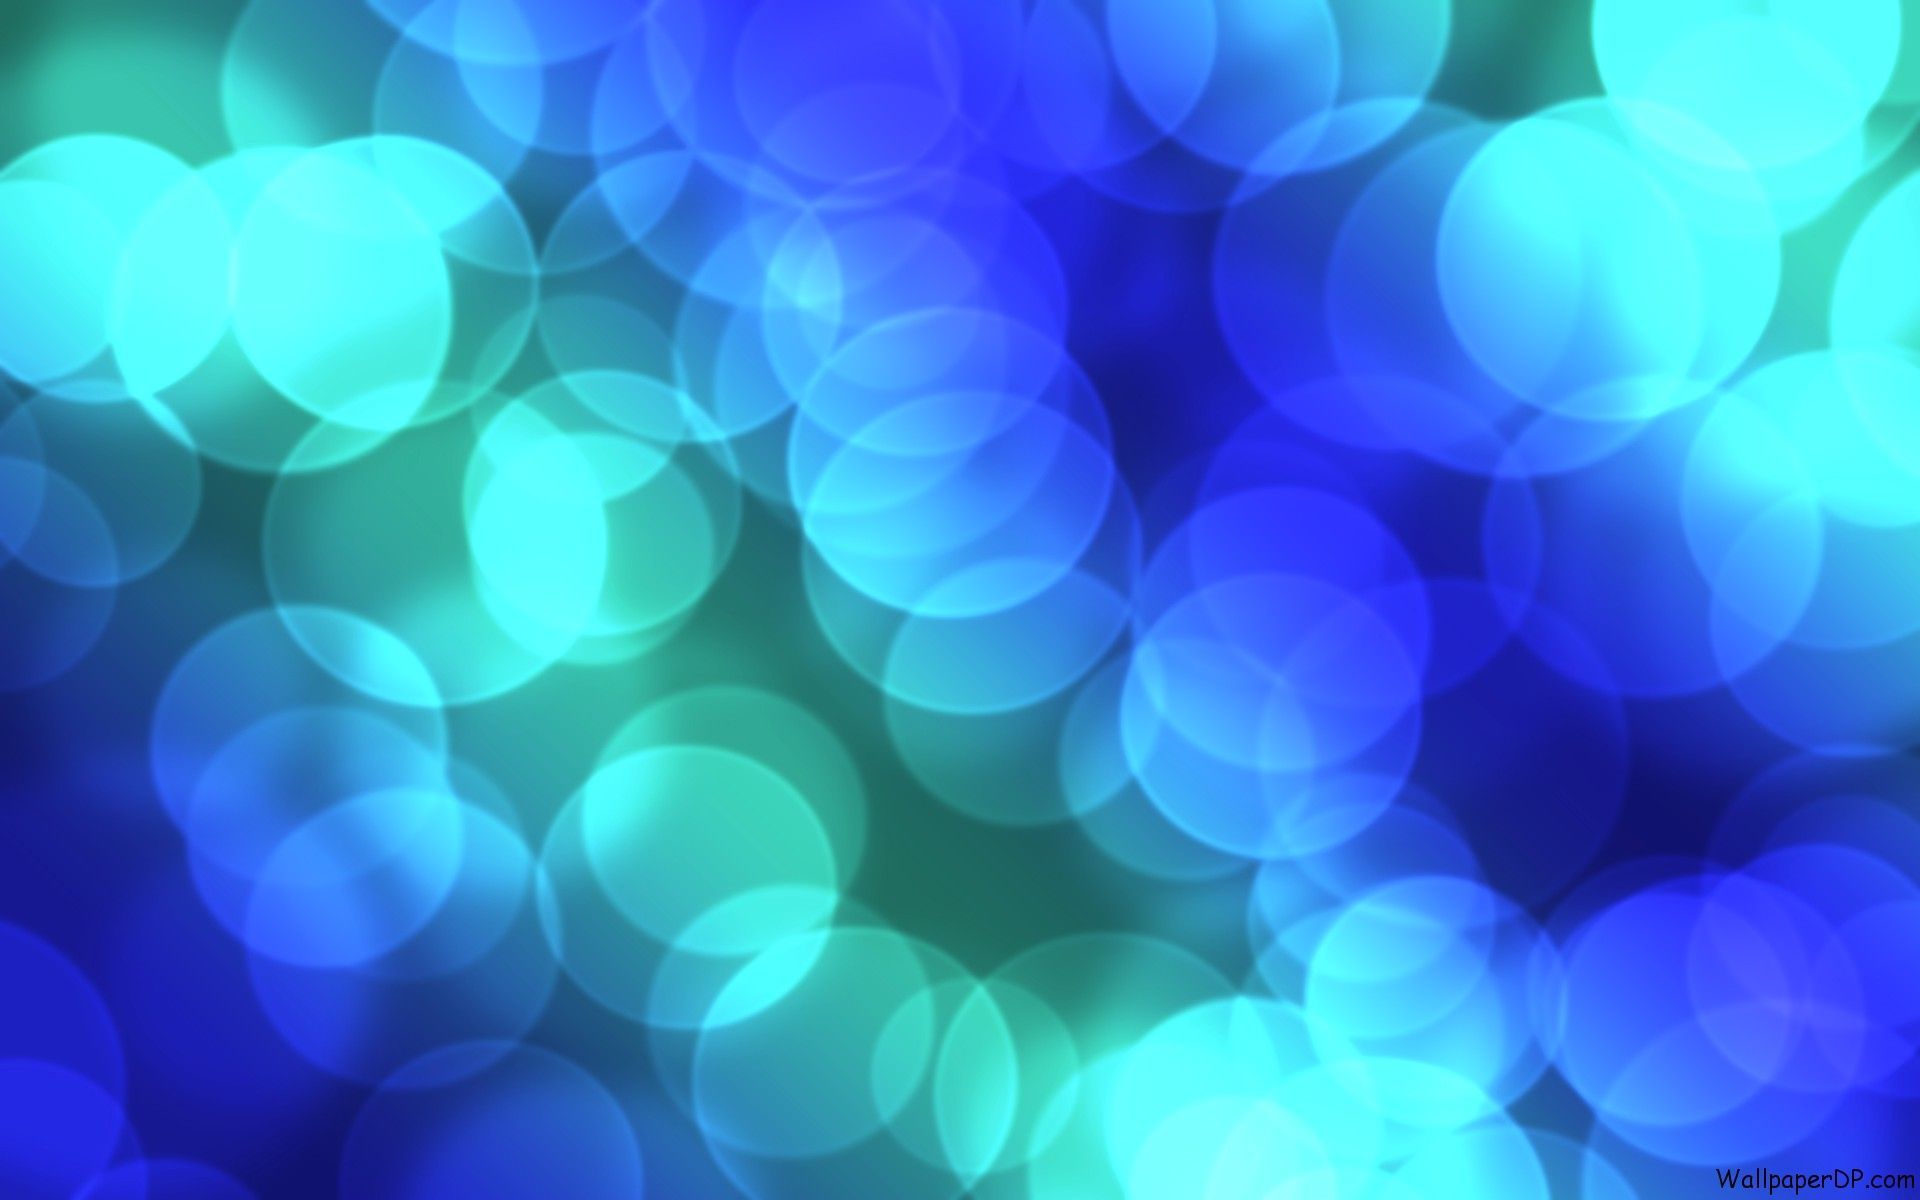 Image for Blue Light Blur Background HD Image Download Free. Arts and crafts for teens, Easy arts and crafts, Arts and crafts interiors